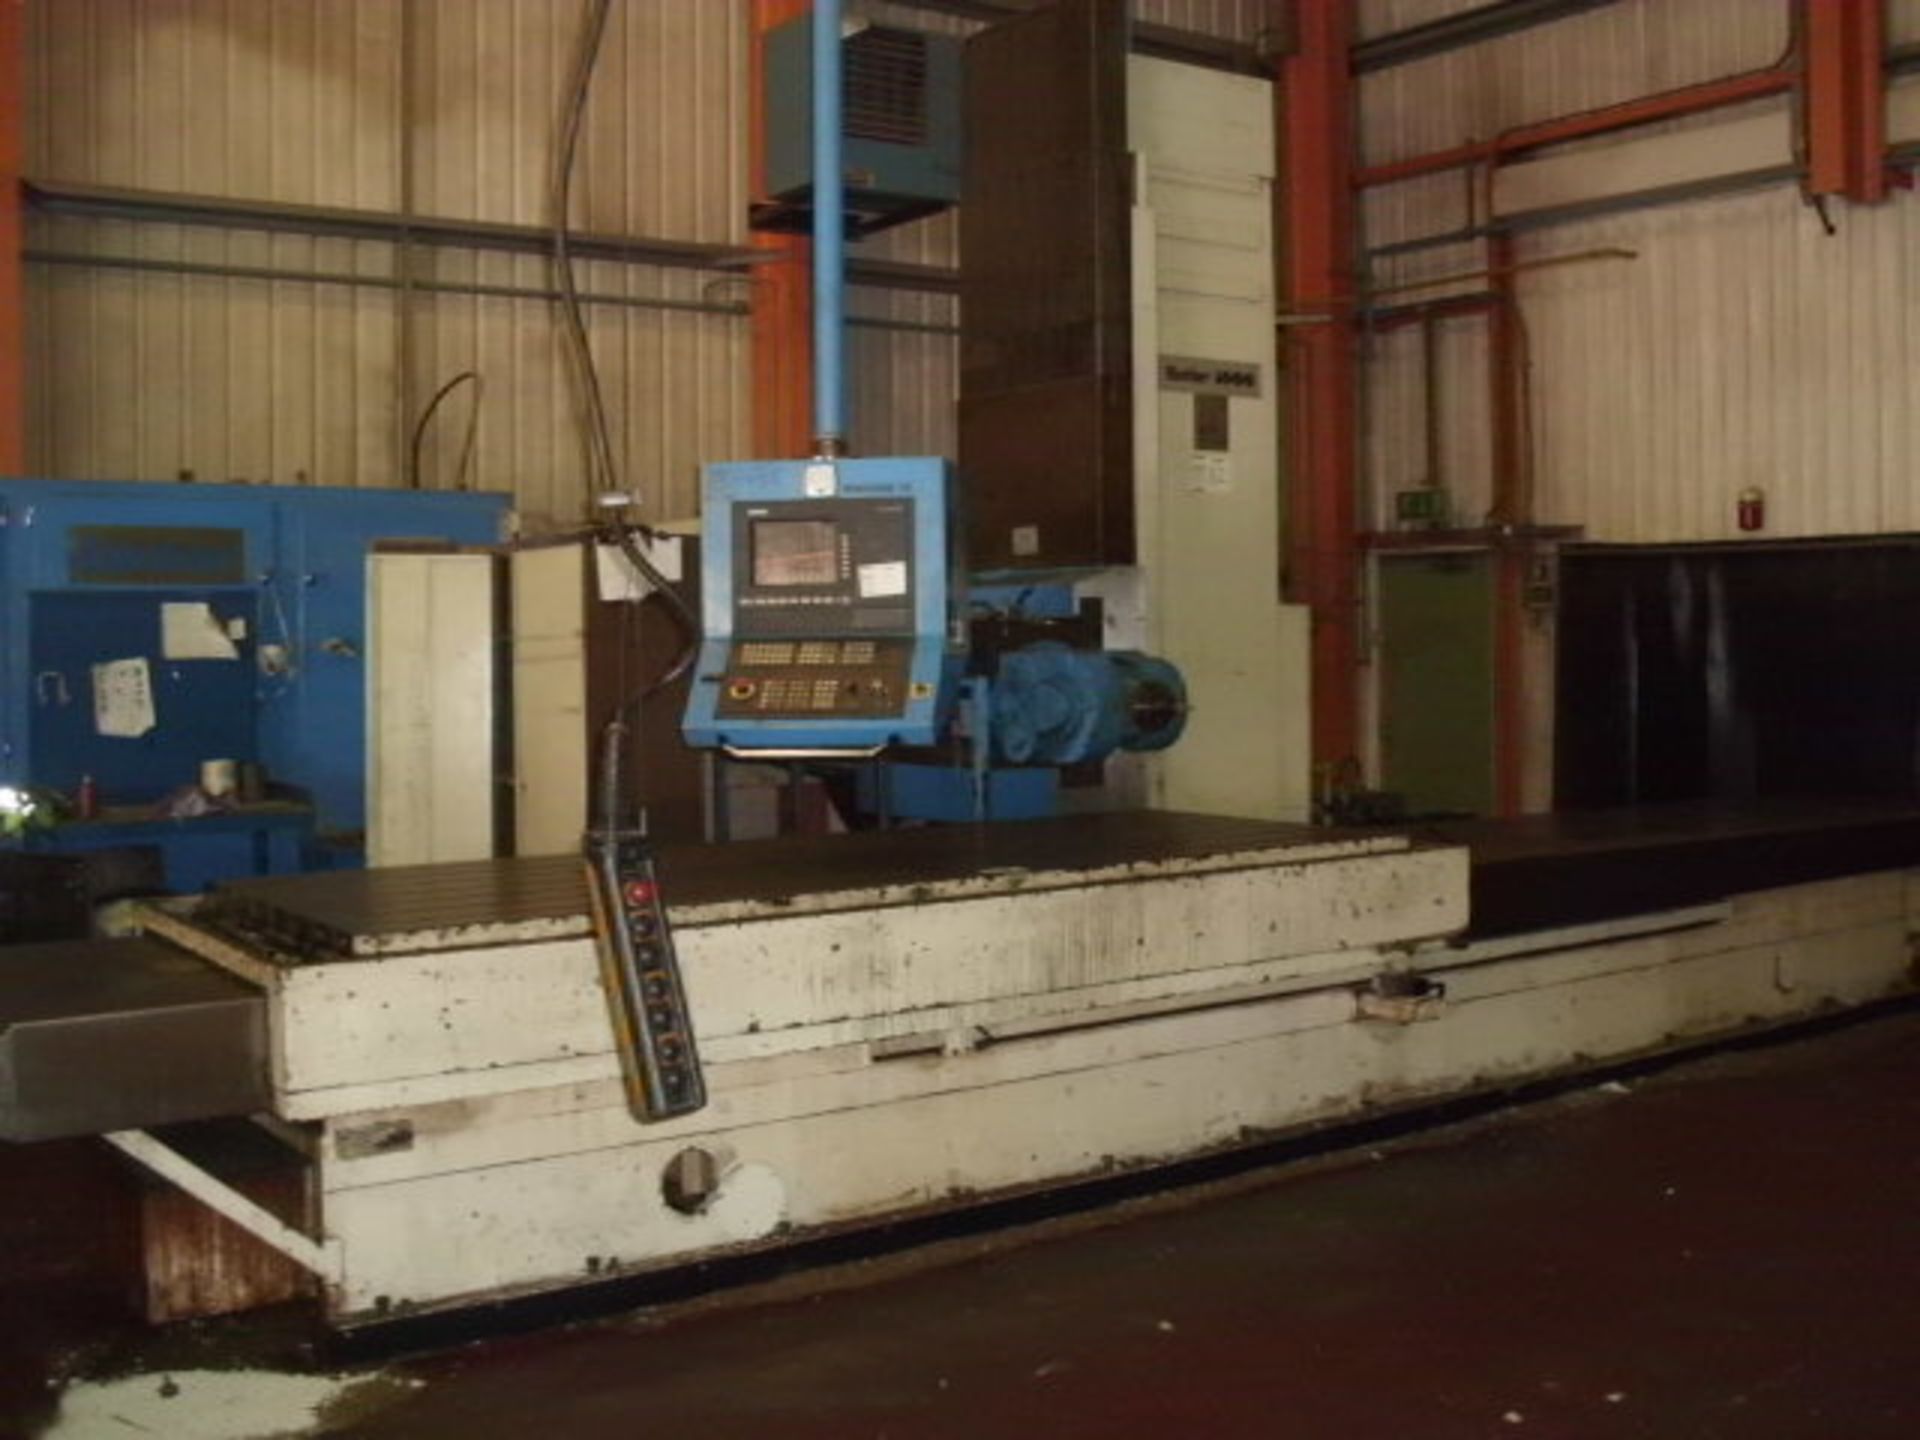 BUTLER TE 3000, travelling table, 5 axis CNC bedmill, Siemens Sinumerik controls, X - ?, Y - ?,